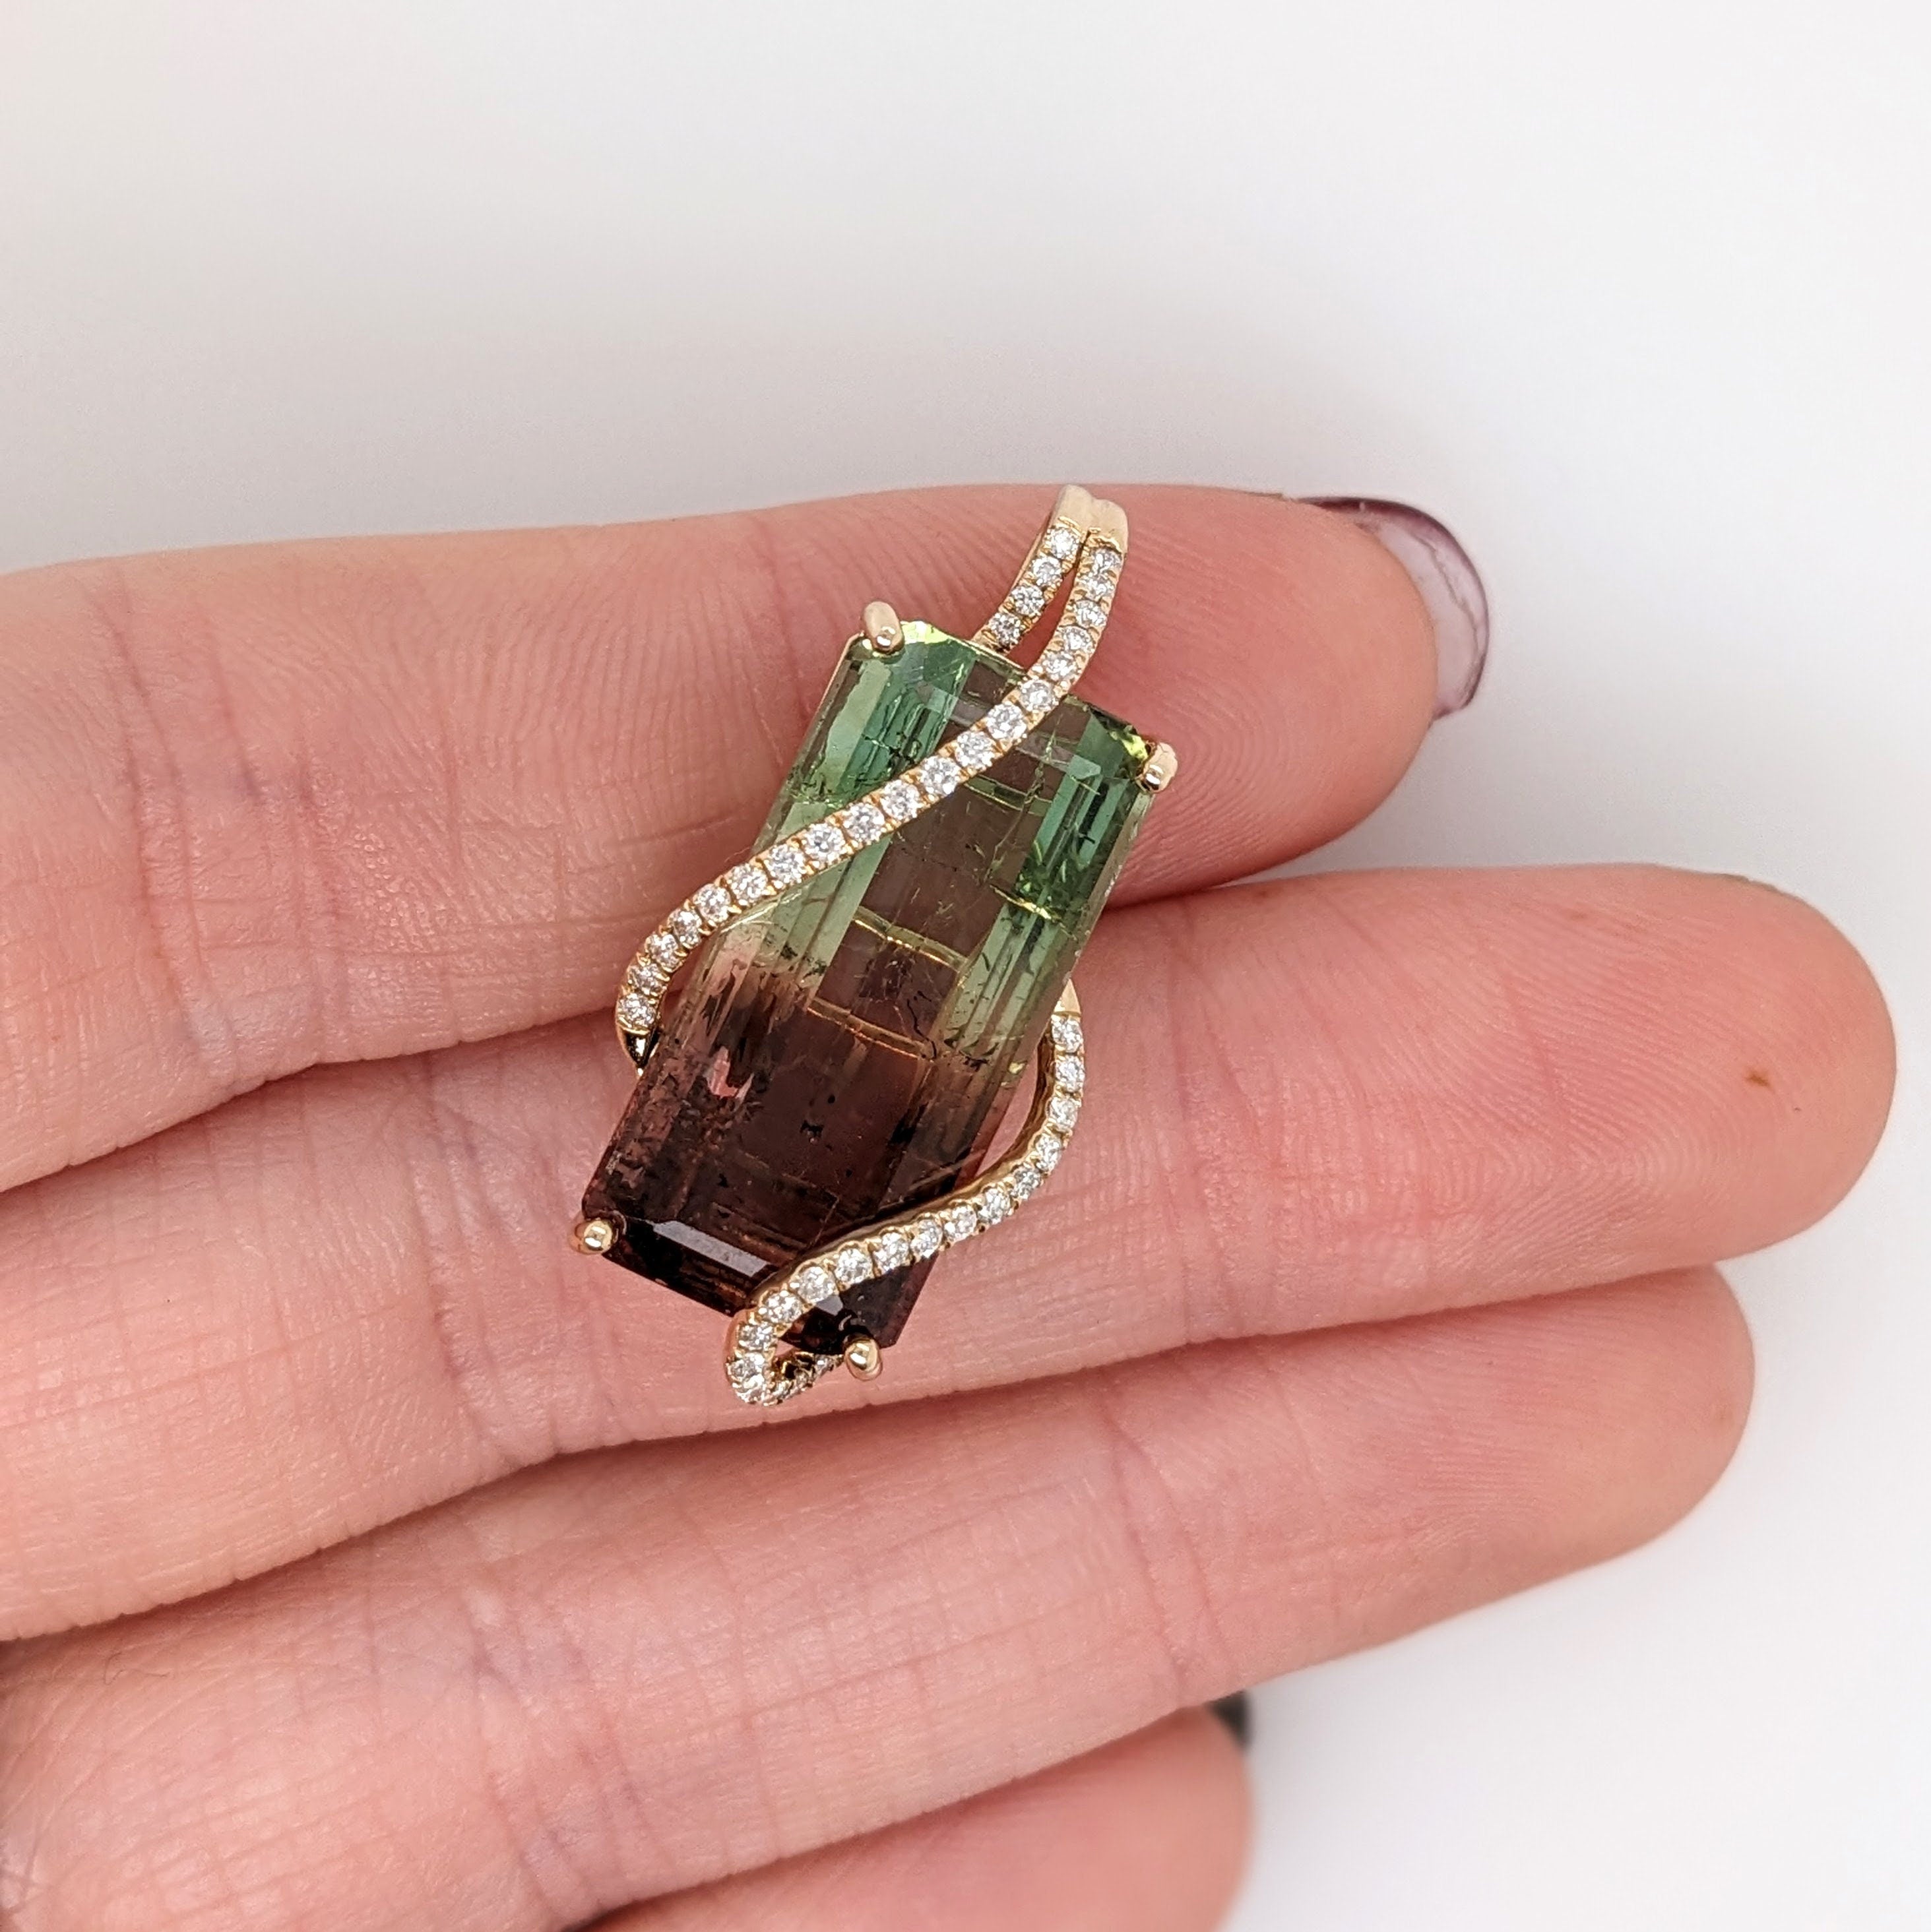 Pendants-Unique Bi Colored Tourmaline Pendant in Solid 14K Yellow Gold with Natural Diamond Accents || Emerald Cut 22x11mm || October Birthstone || - NNJGemstones